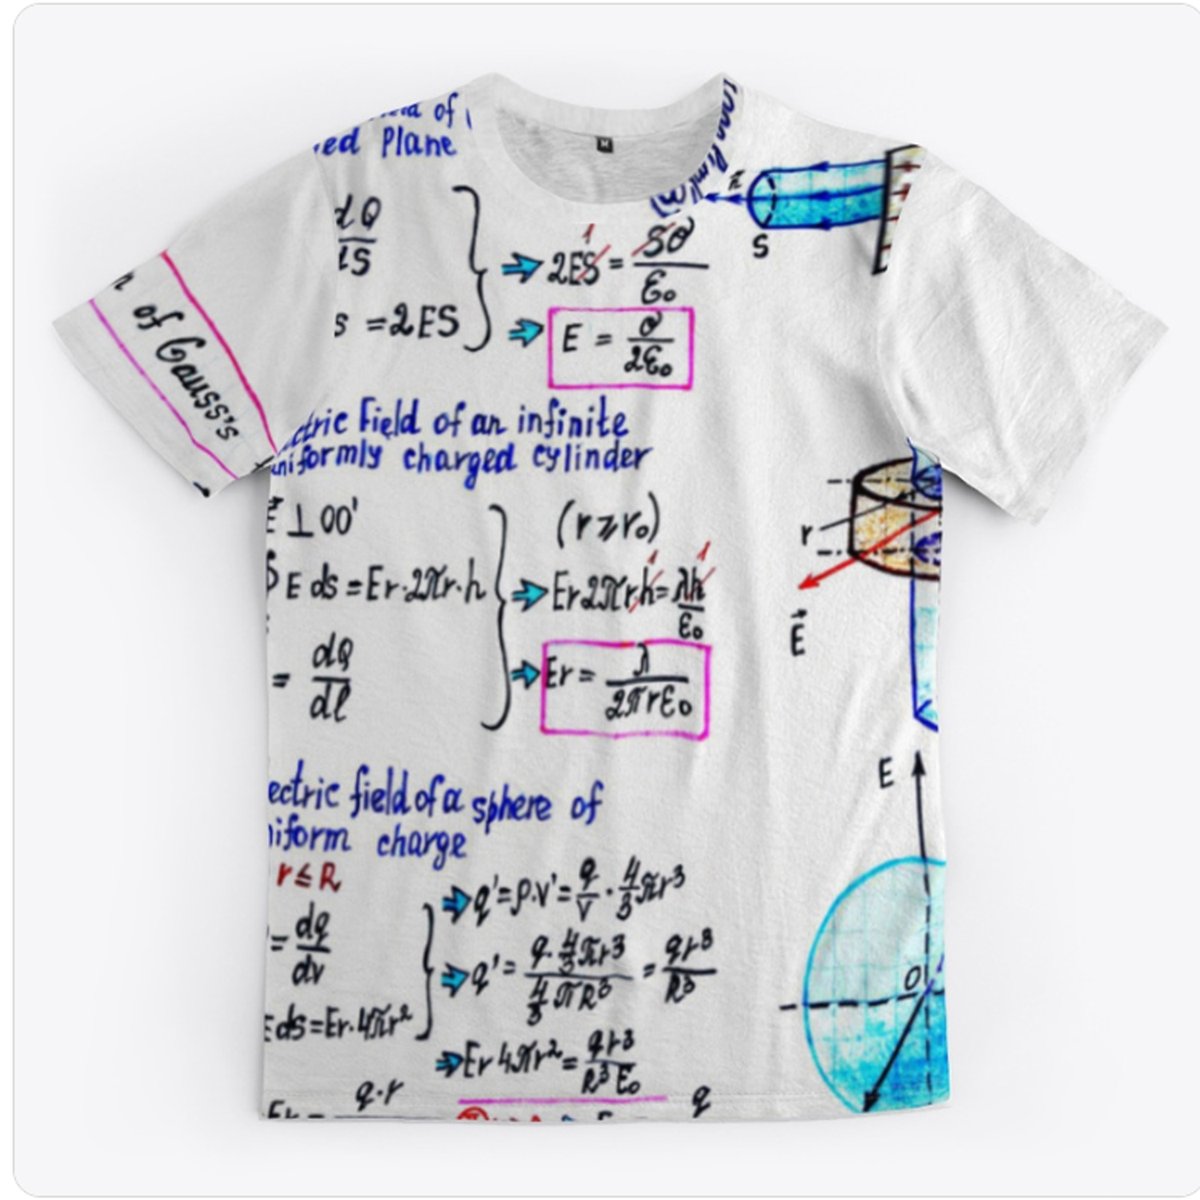 For fans of my art. You can order this T-shirt from the link: jurij0001.creator-spring.com/listing/gauss-… Every purchase you make motivates me to create new notes. Sincerely, Yuri Kovalenok #physics #education